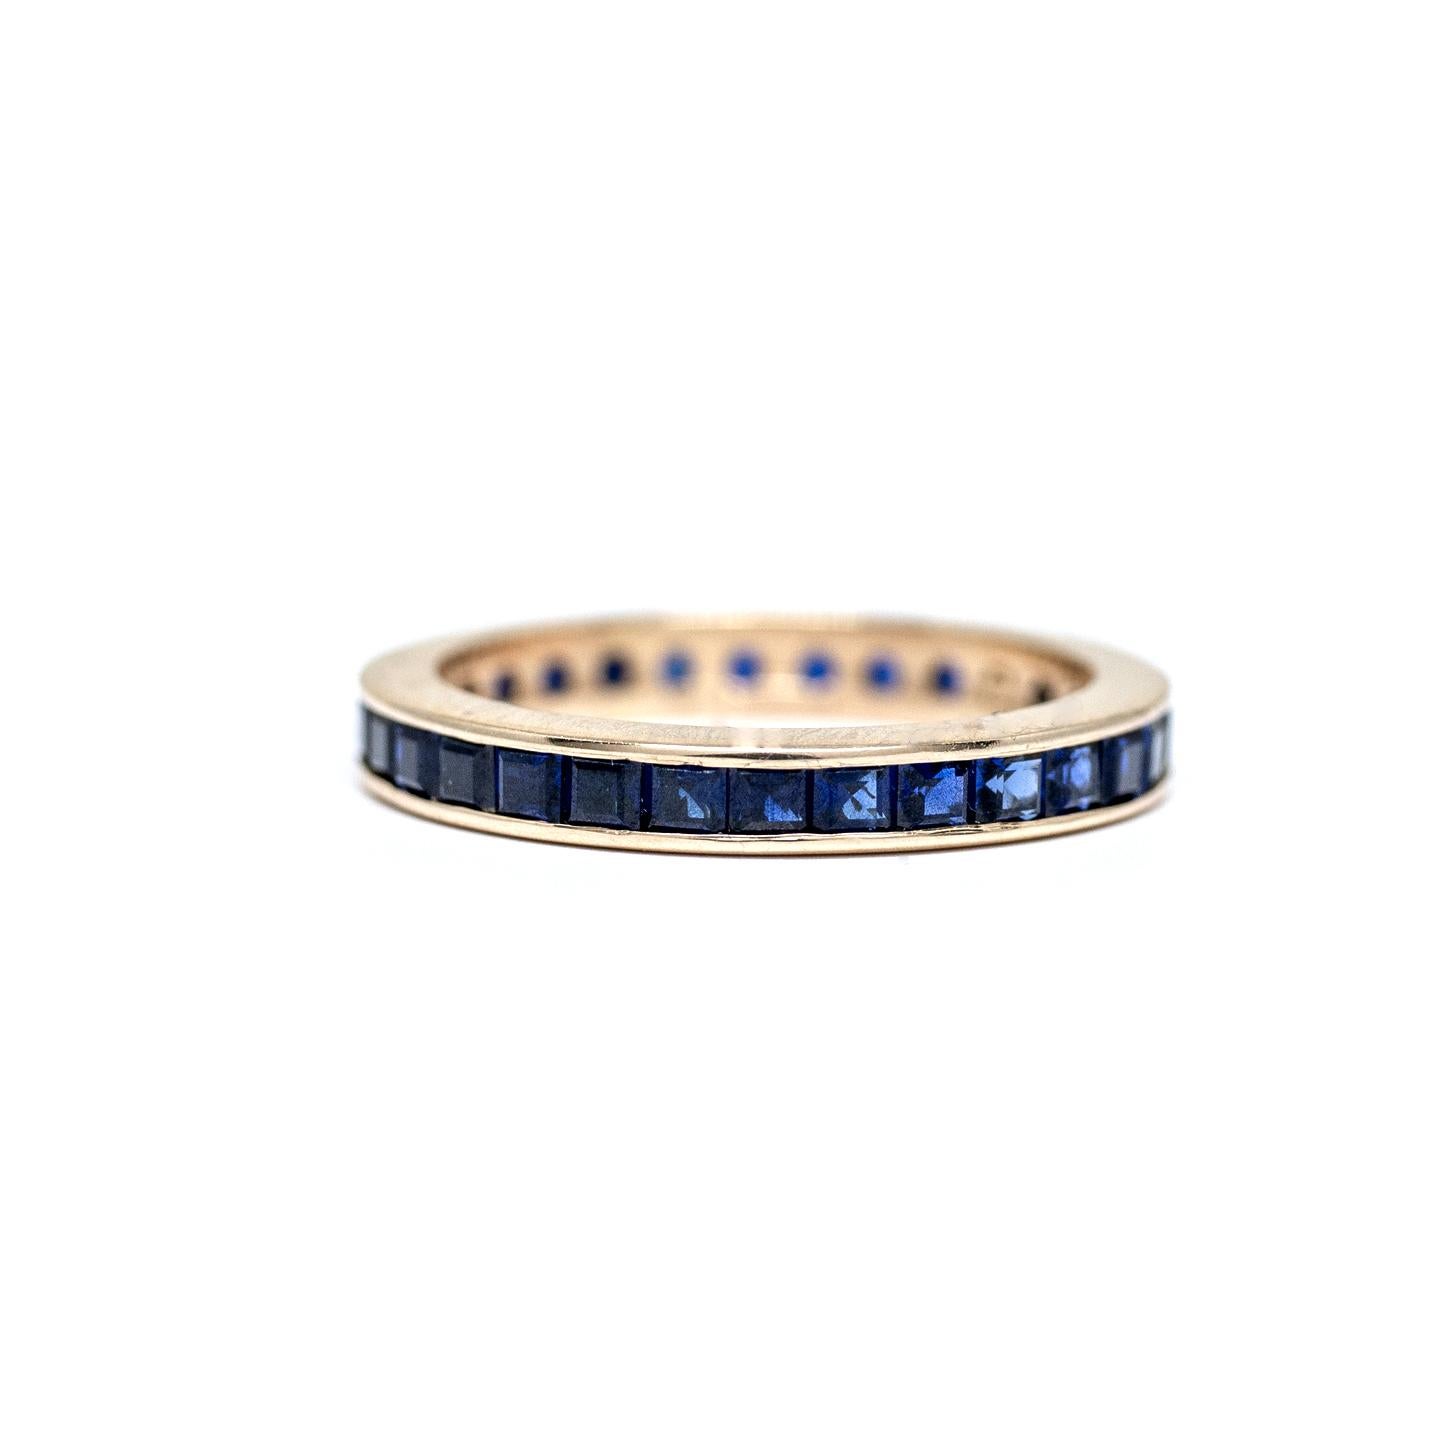 Description: 
This piece is a 1950's eternity band crafted of 14 karat yellow gold holding a carat of high quality synthetic blue sapphires!  A perfect band with a pop of color with beautiful royal blue sapphires that will pair with your engagement